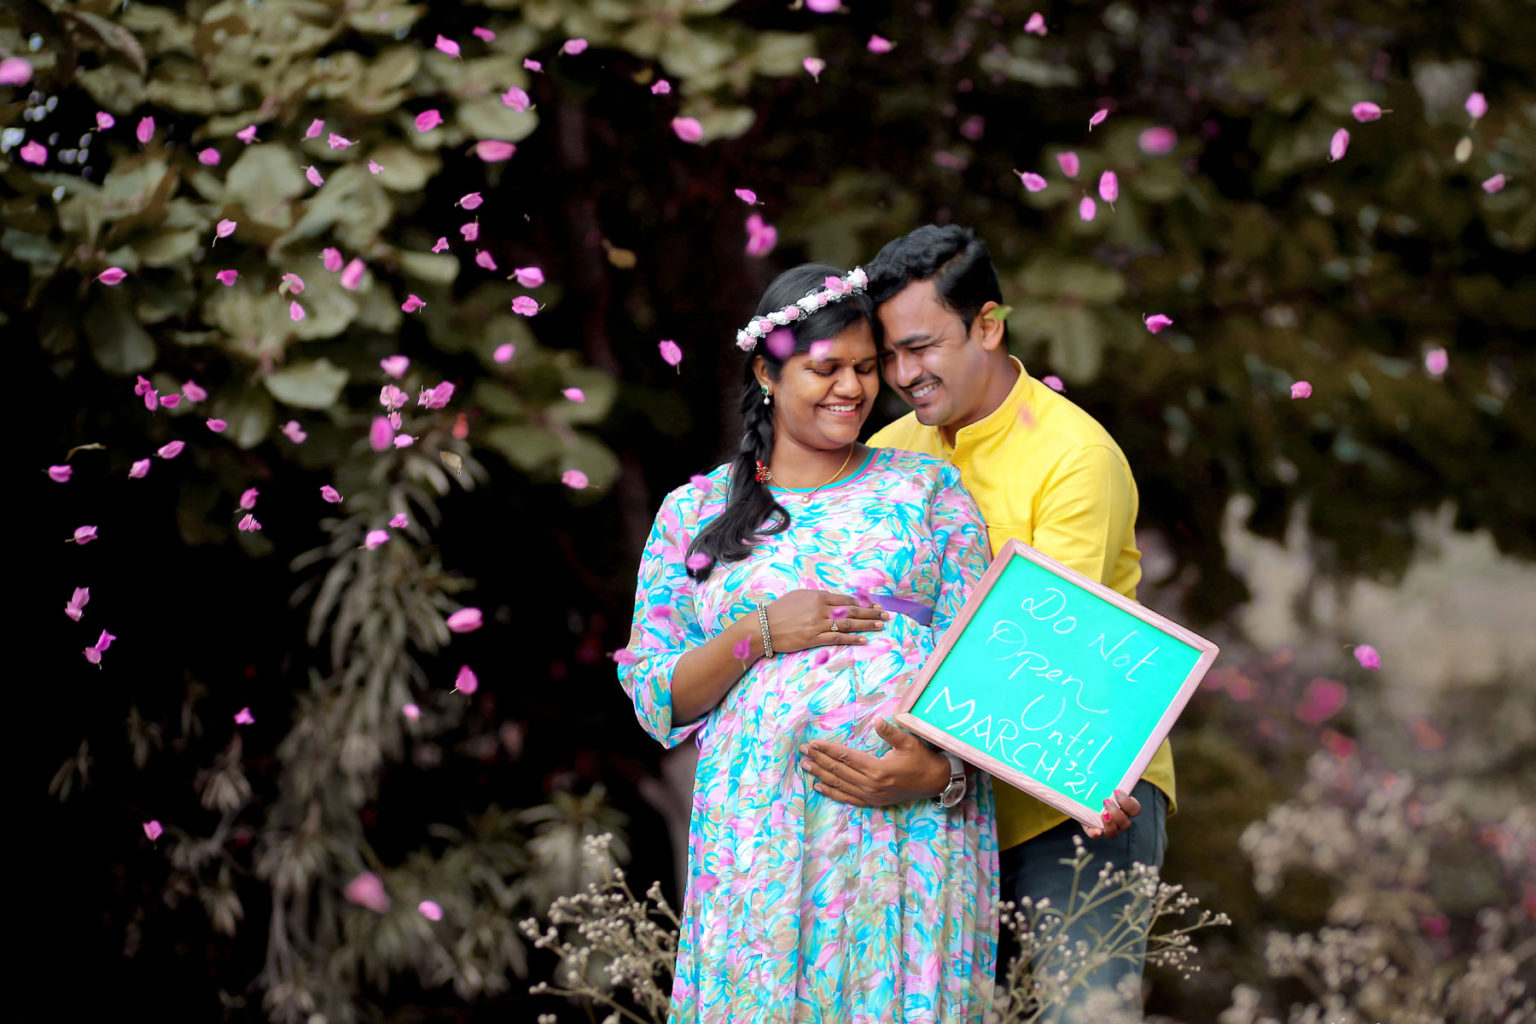 10 Tips for a Stunning Maternity Photo Shoot